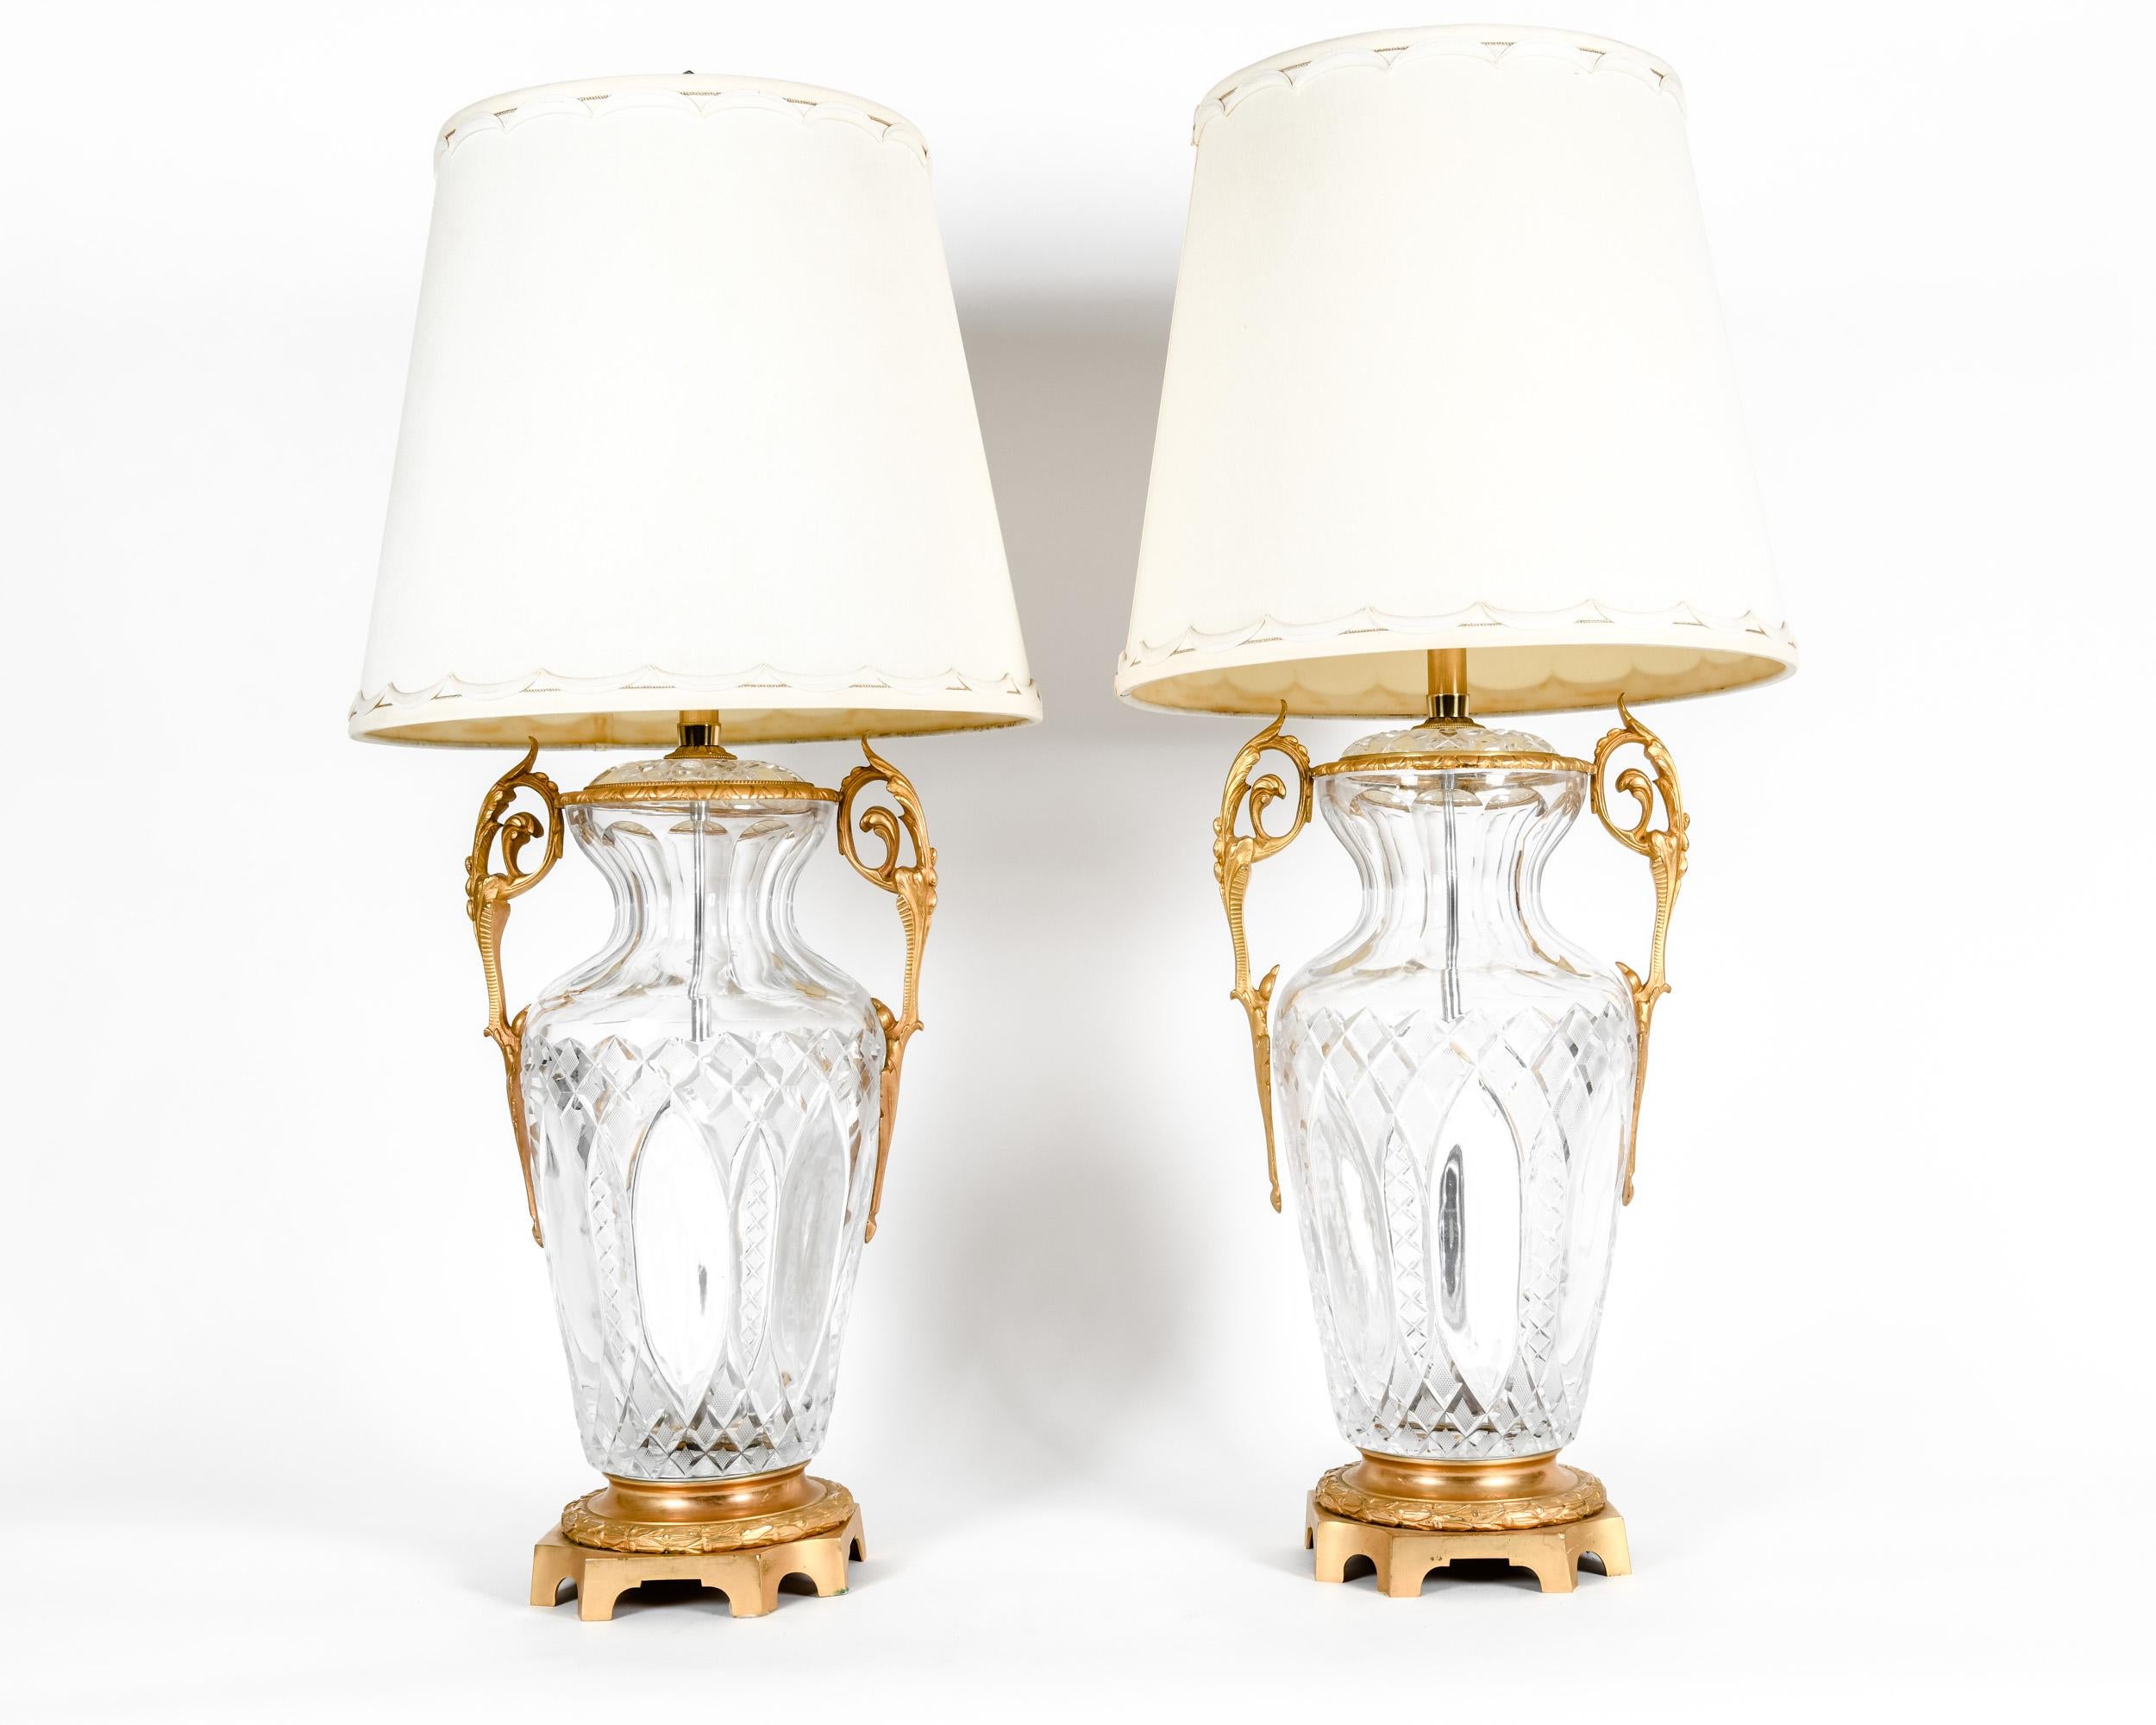 Bronze-mounted with cut crystal pair early 19th century table lamps. Each lamp is in excellent antique working condition. No special light bulb required. Rewired for US use, minor wear consistent with age or use. Measures: Each lamp stand about 38.5